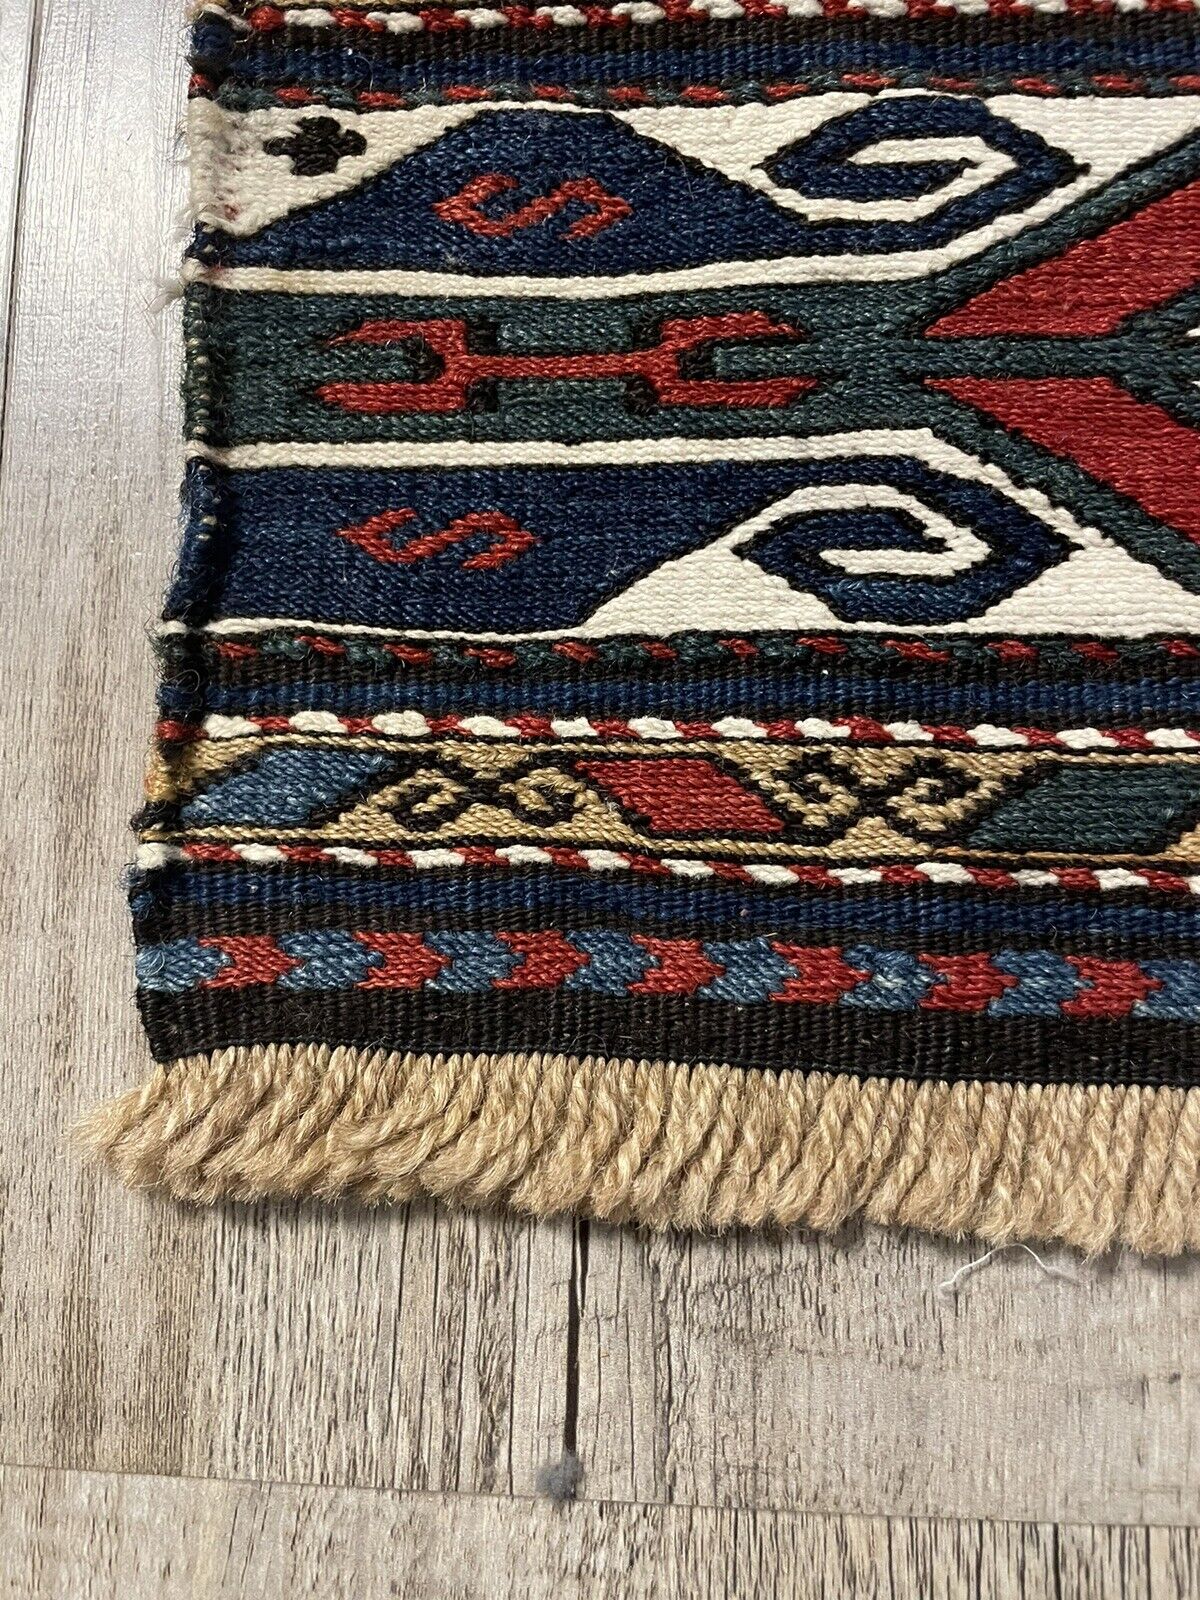 Close-up of natural dyes on Handmade Antique Persian Sumak Collectible Kilim - Detailed view highlighting the use of natural dyes in the vibrant colors of the kilim.